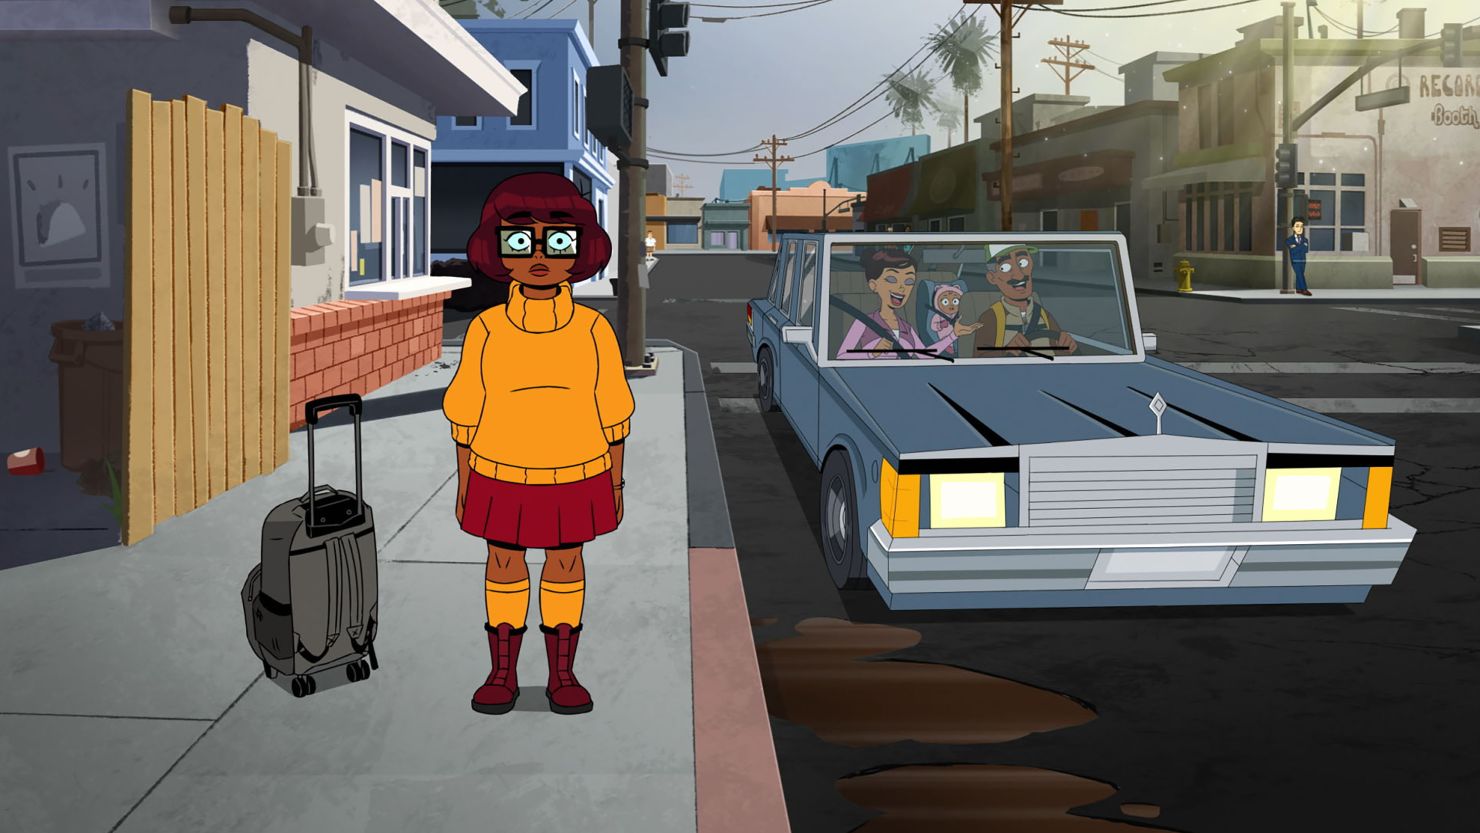 Mindy Kaling provides the voice of the title character in "Velma," premiering on HBO Max.